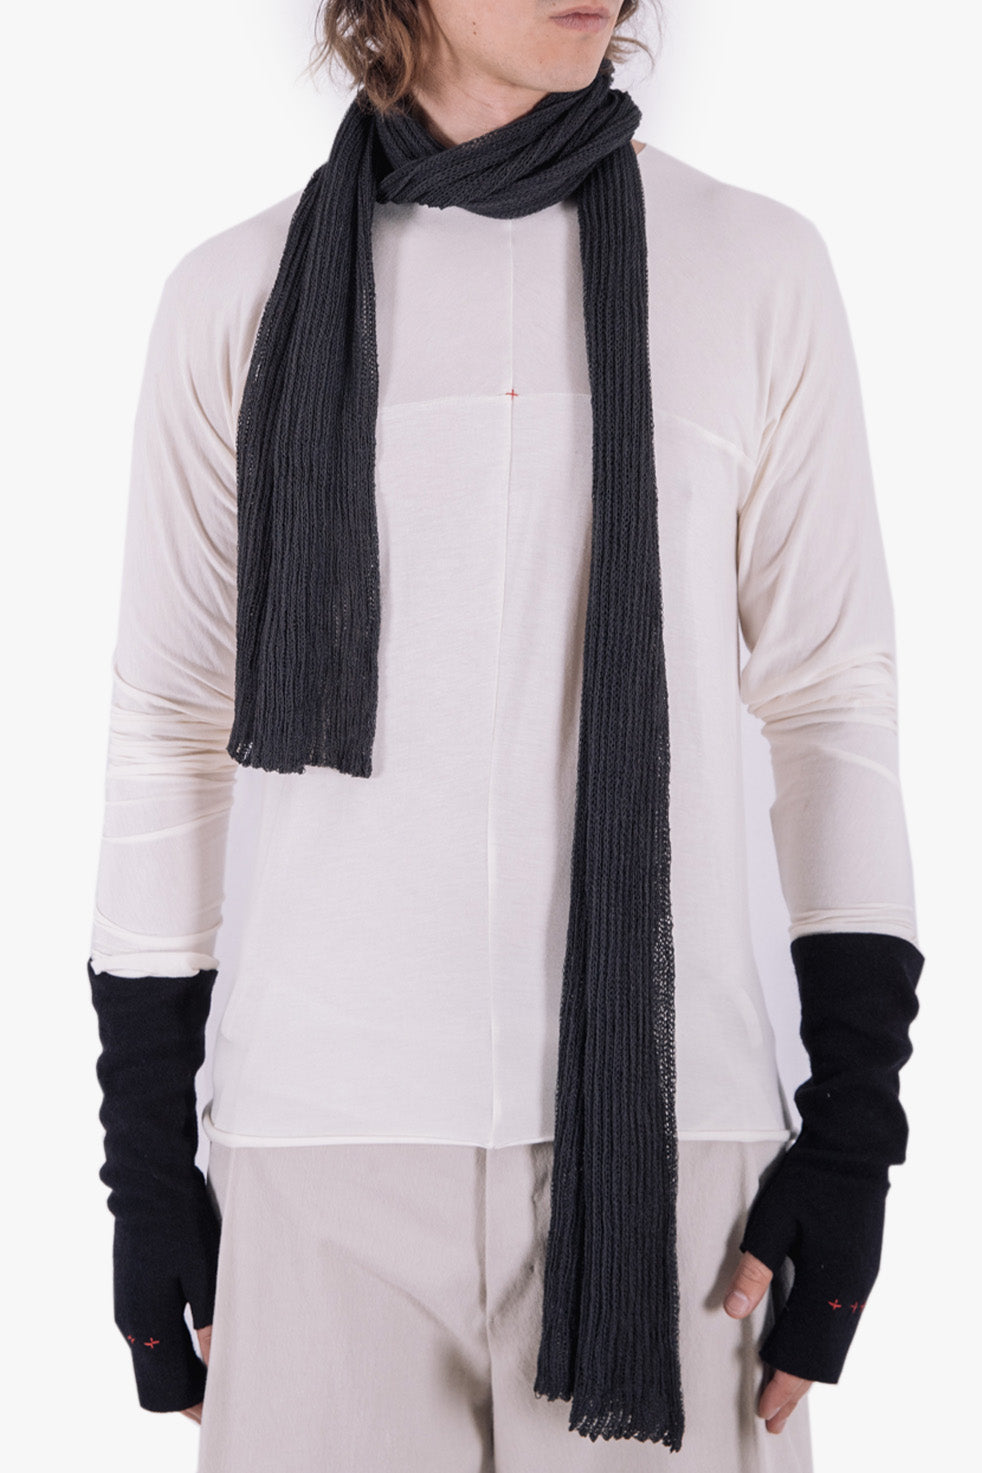 K-165 REFLECTIVE KNITTED SCARF